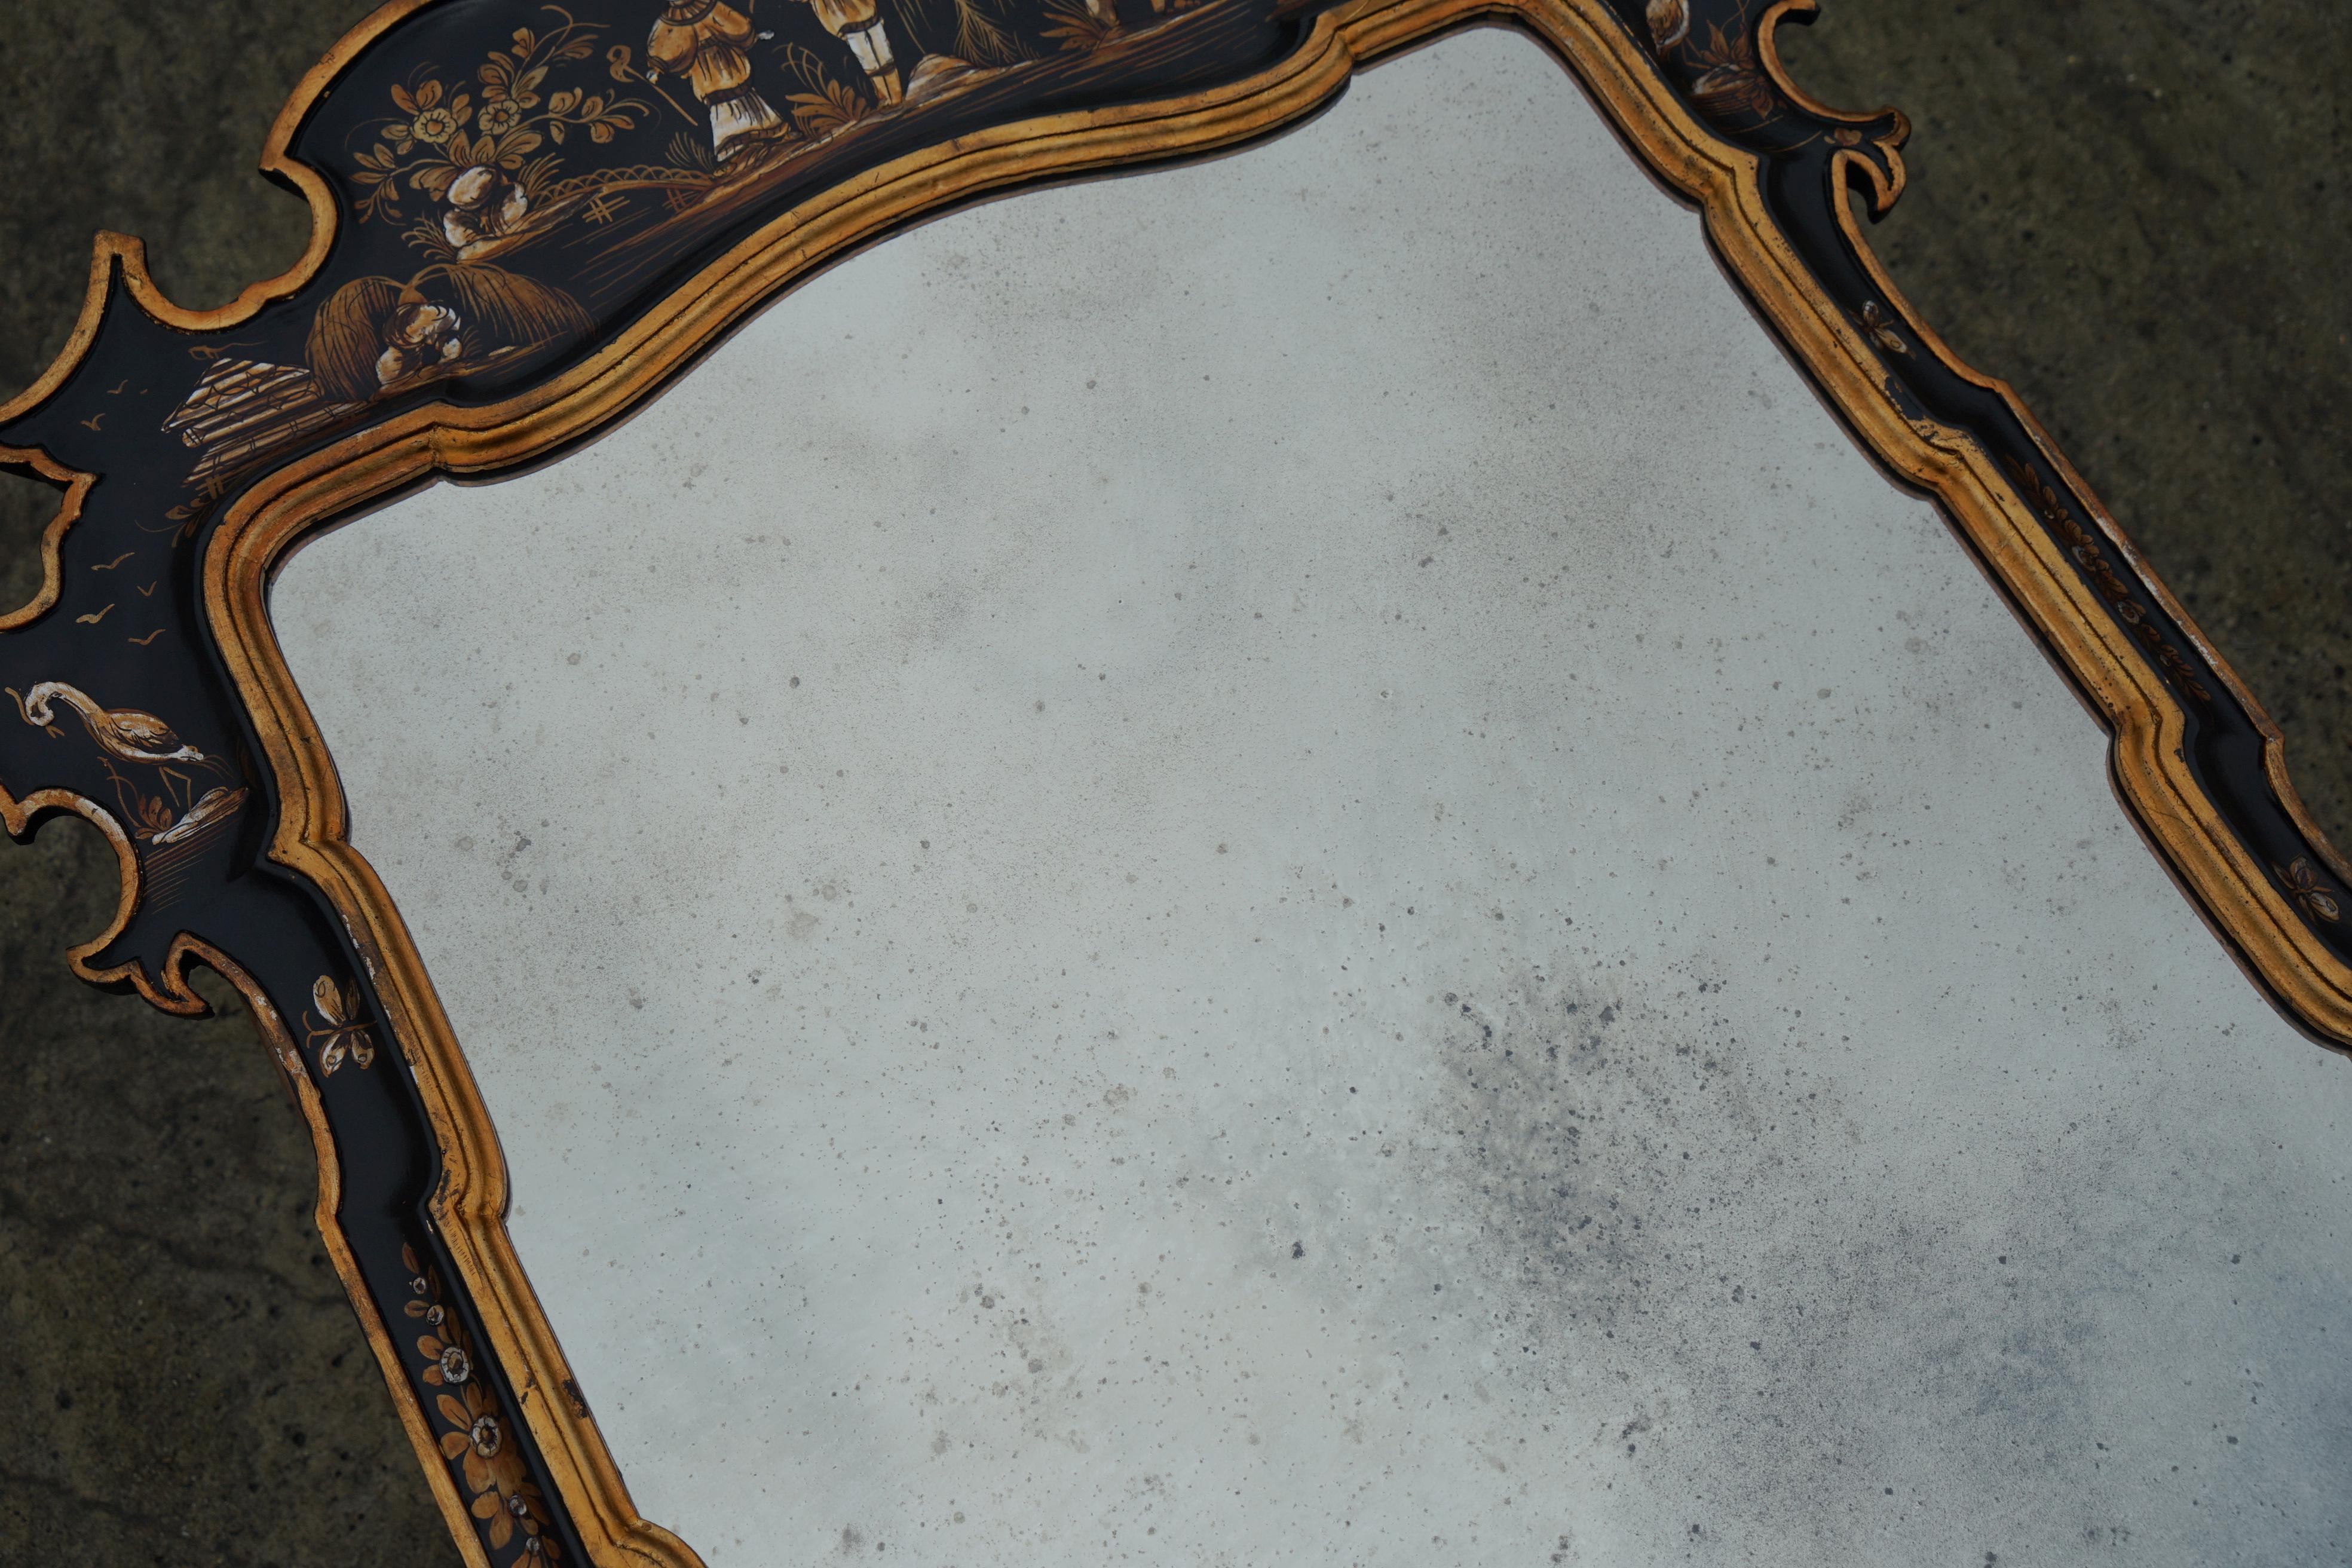 1.4 METER CHINESE CHINOISERIE MiRROR ORNATE HAND PAINTINGS STAMPED MADE IN ITALY For Sale 2